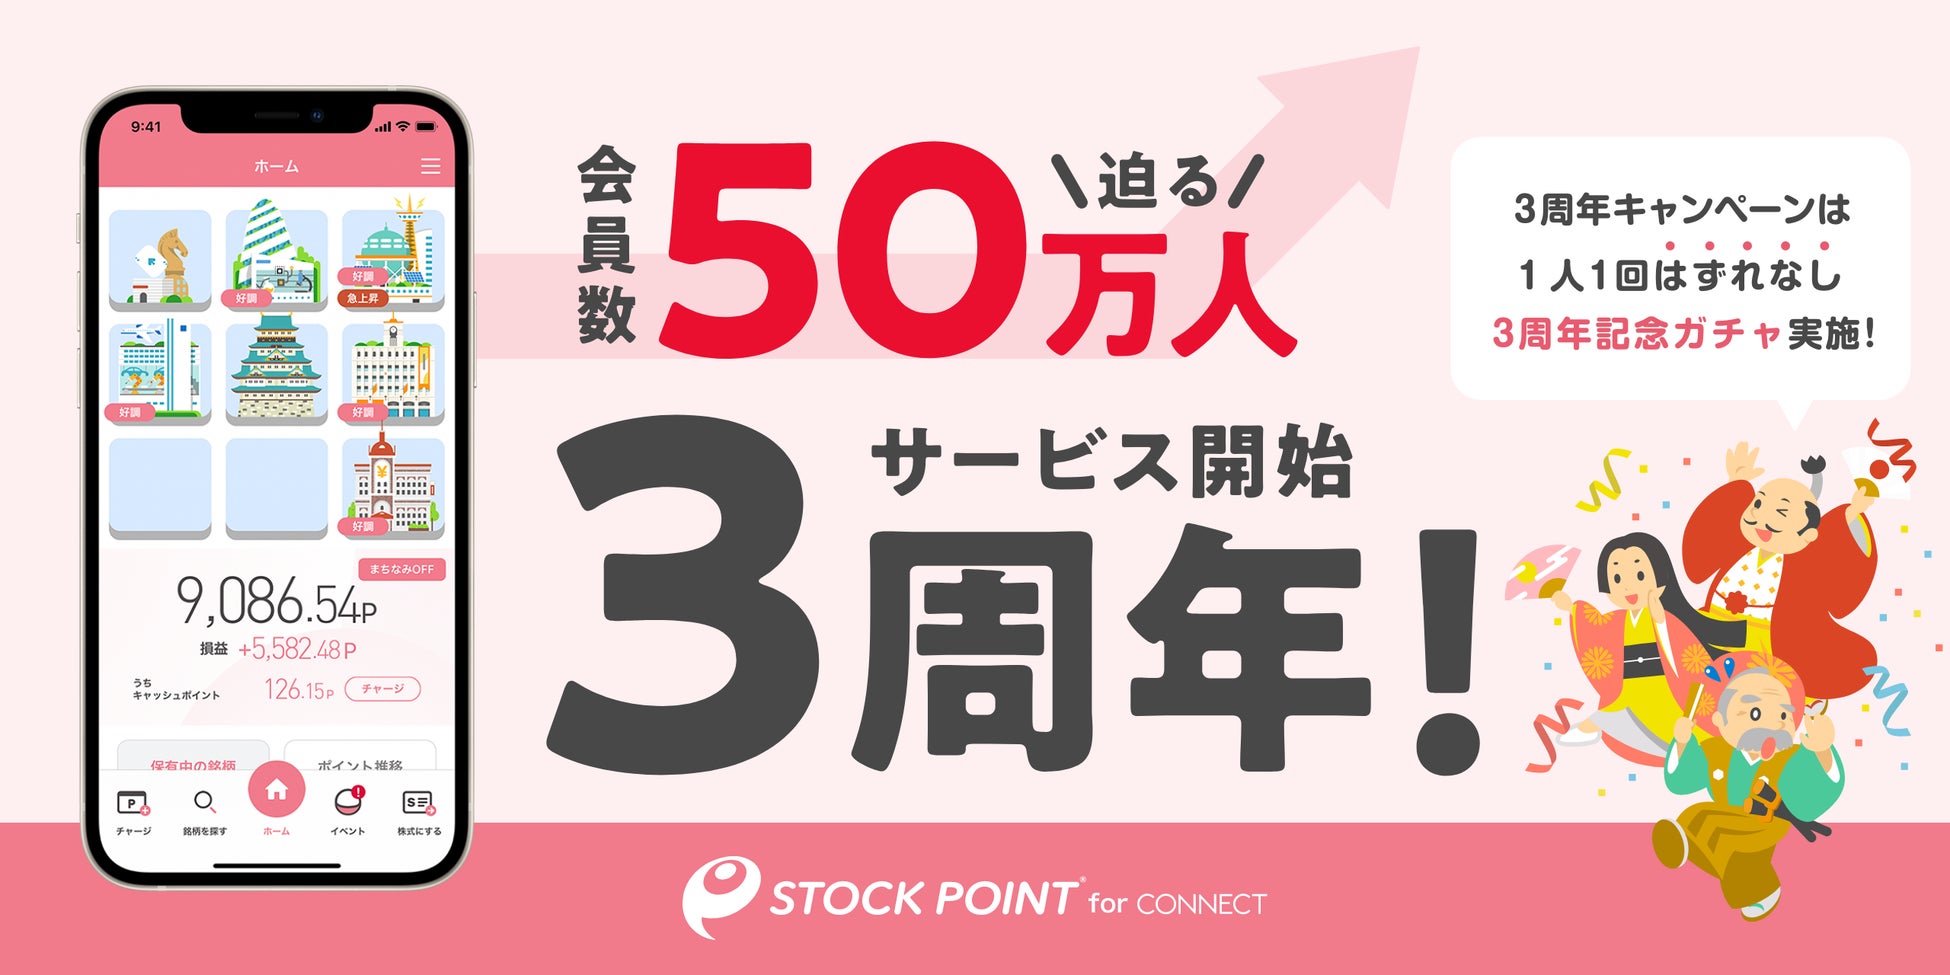 StockPoint for CONNECT、3年で会員50万人に迫る！